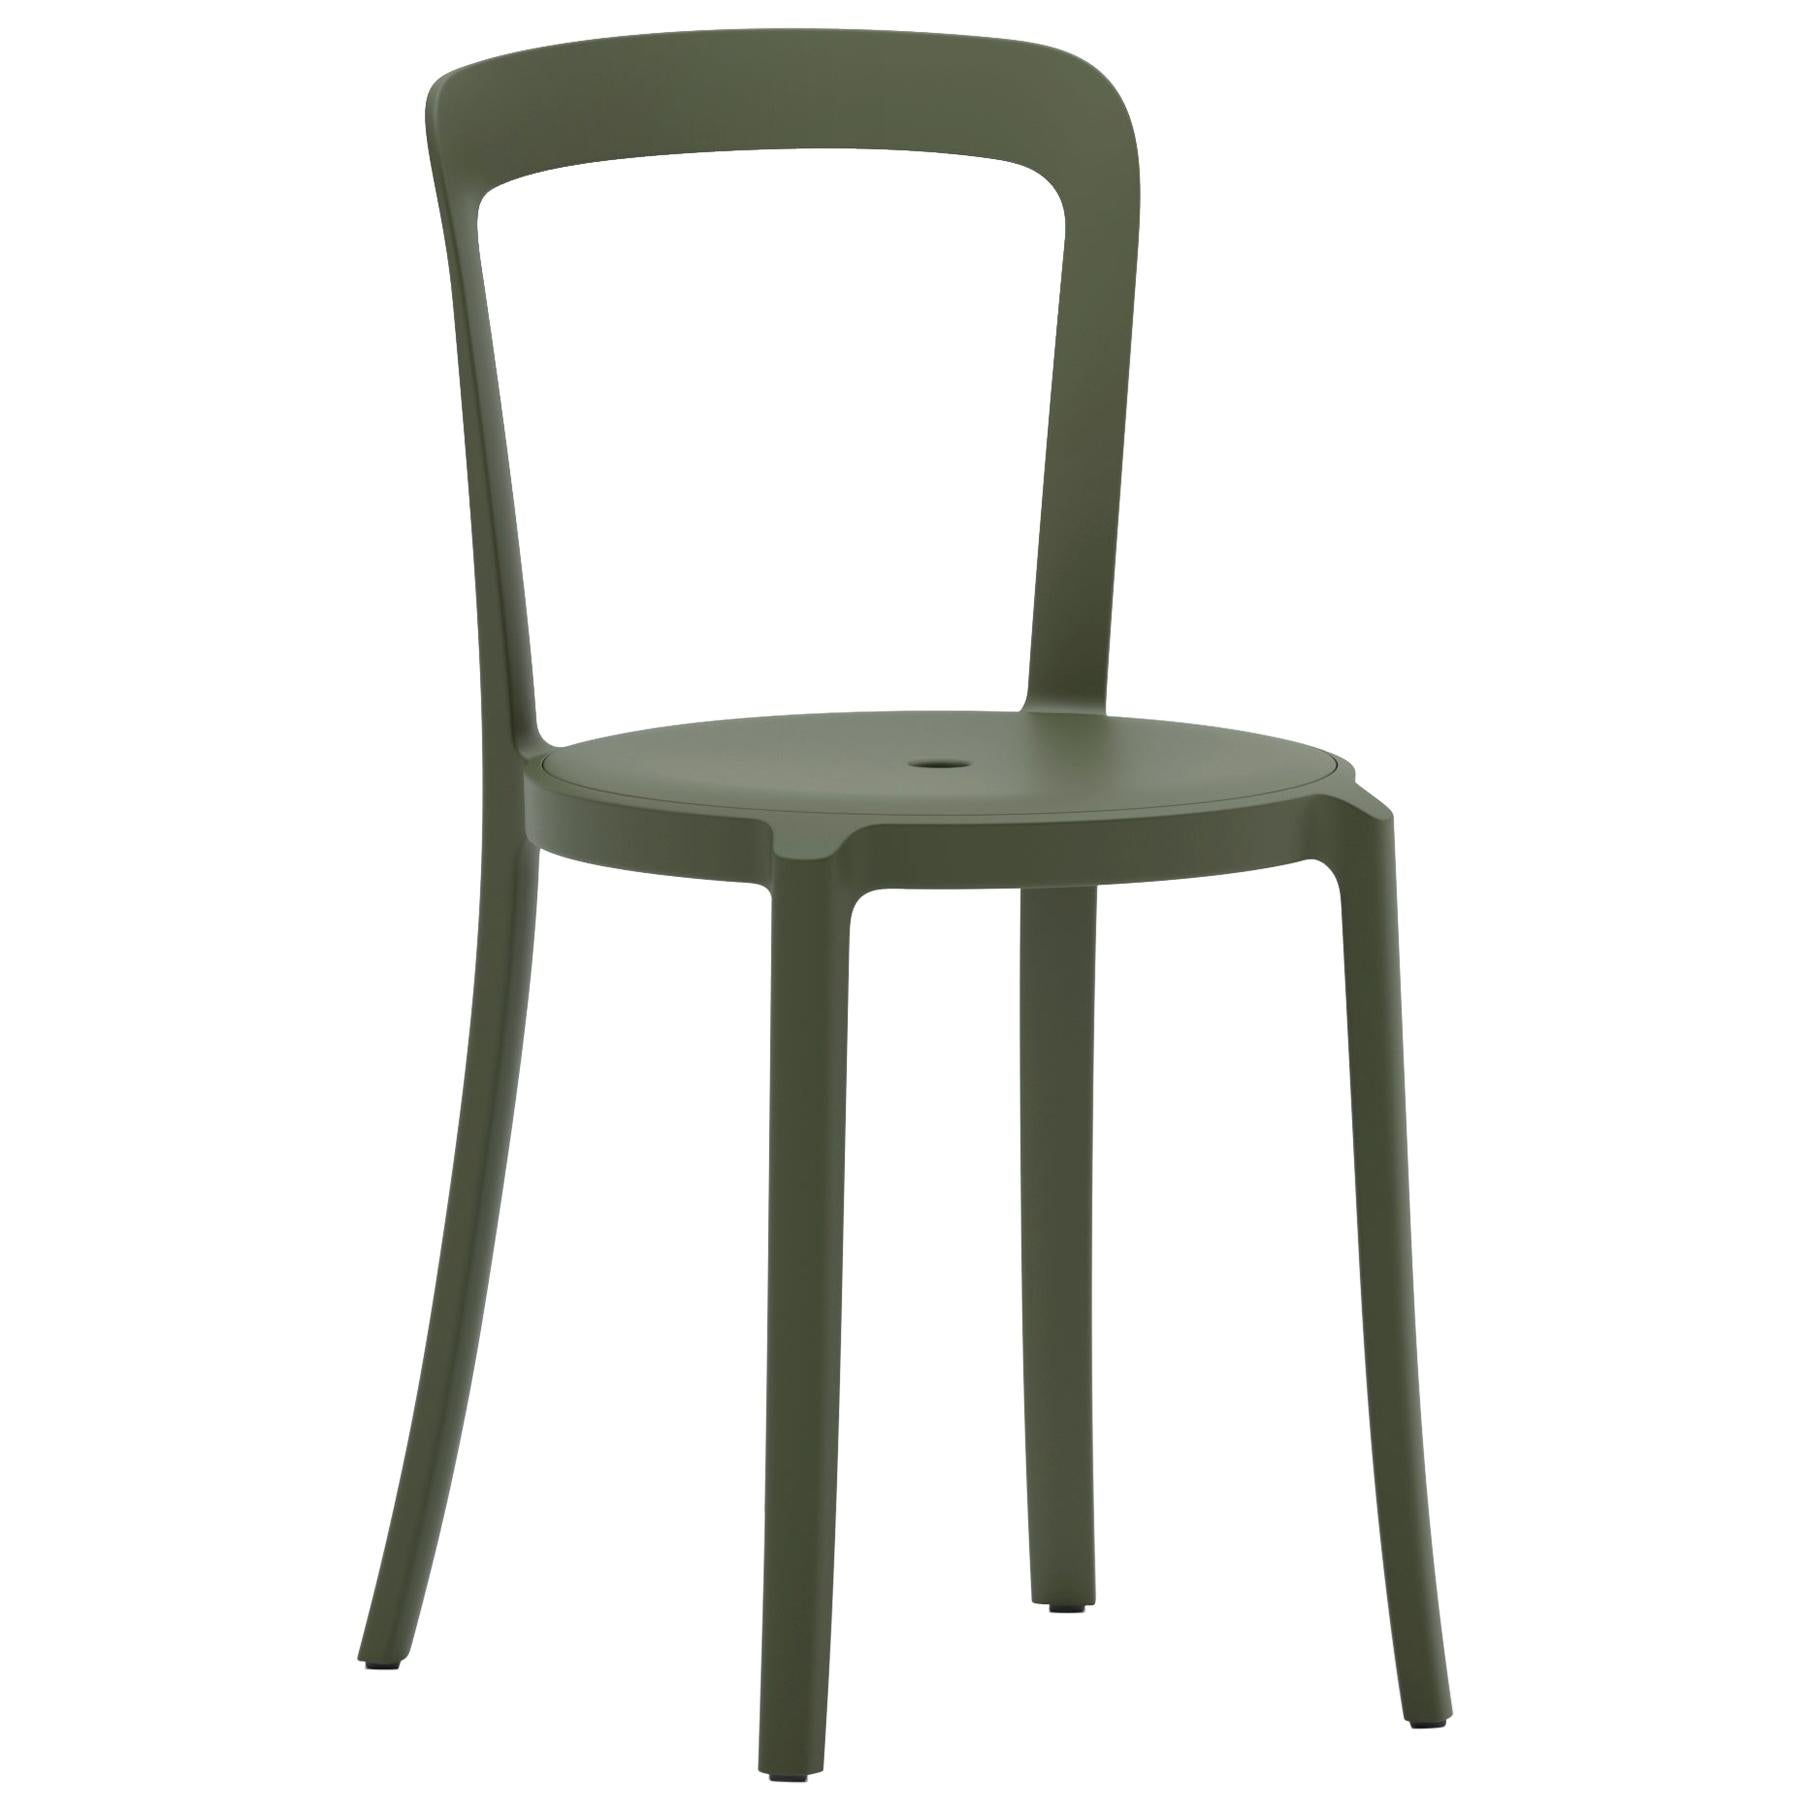 Emeco On & On Stacking Chair in Green Plastic by Barber & Osgerby